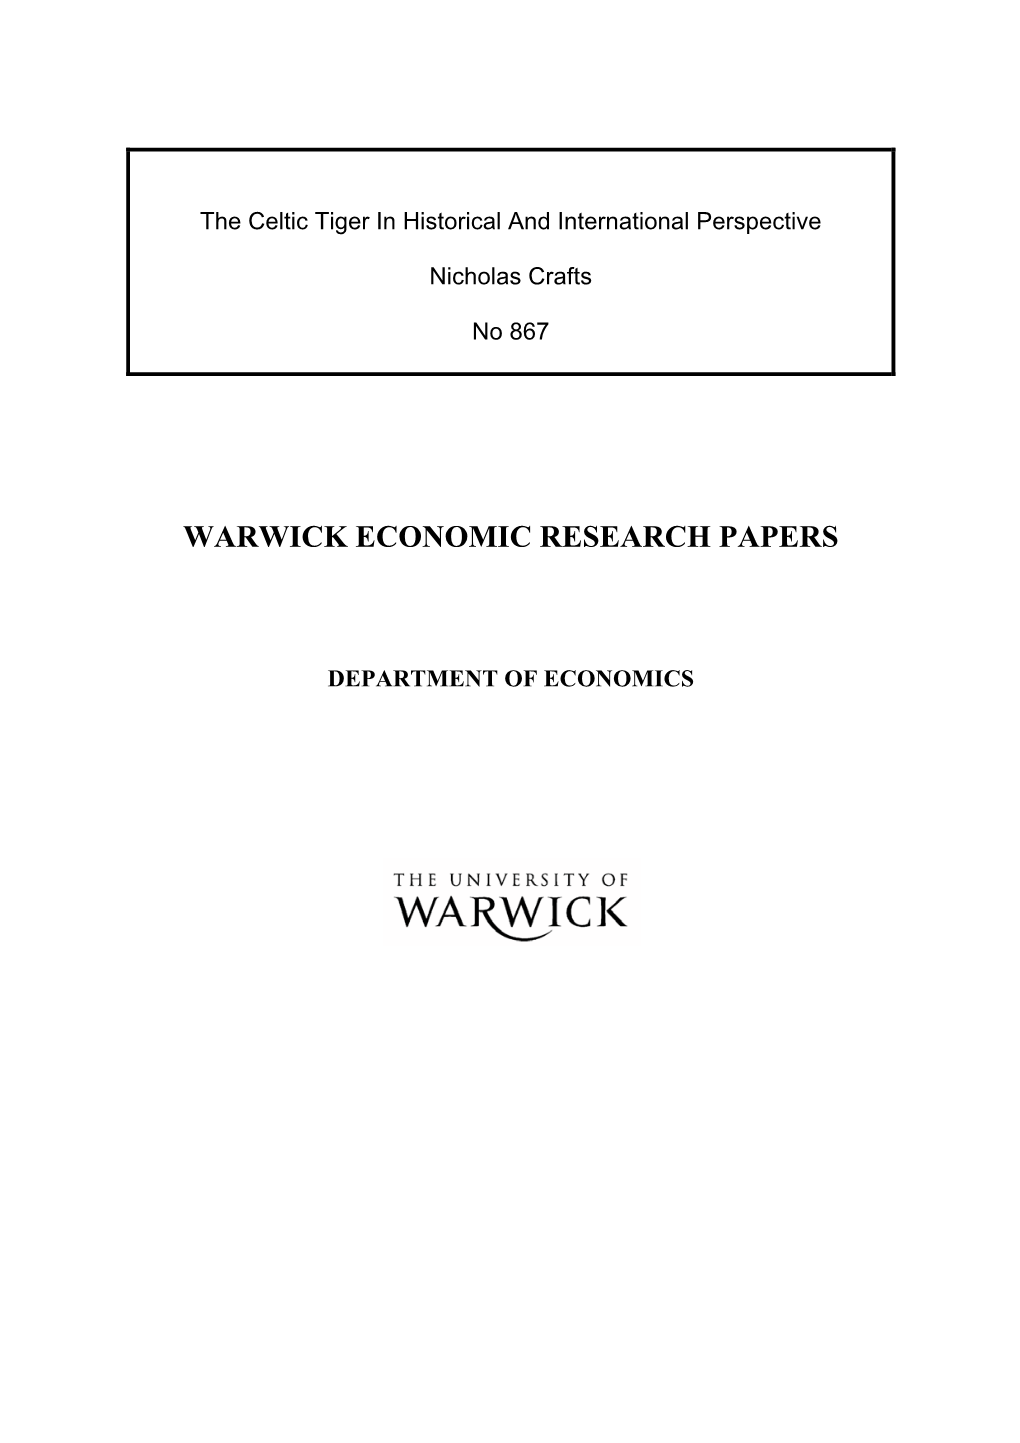 The Celtic Tiger in Historical and International Perspective